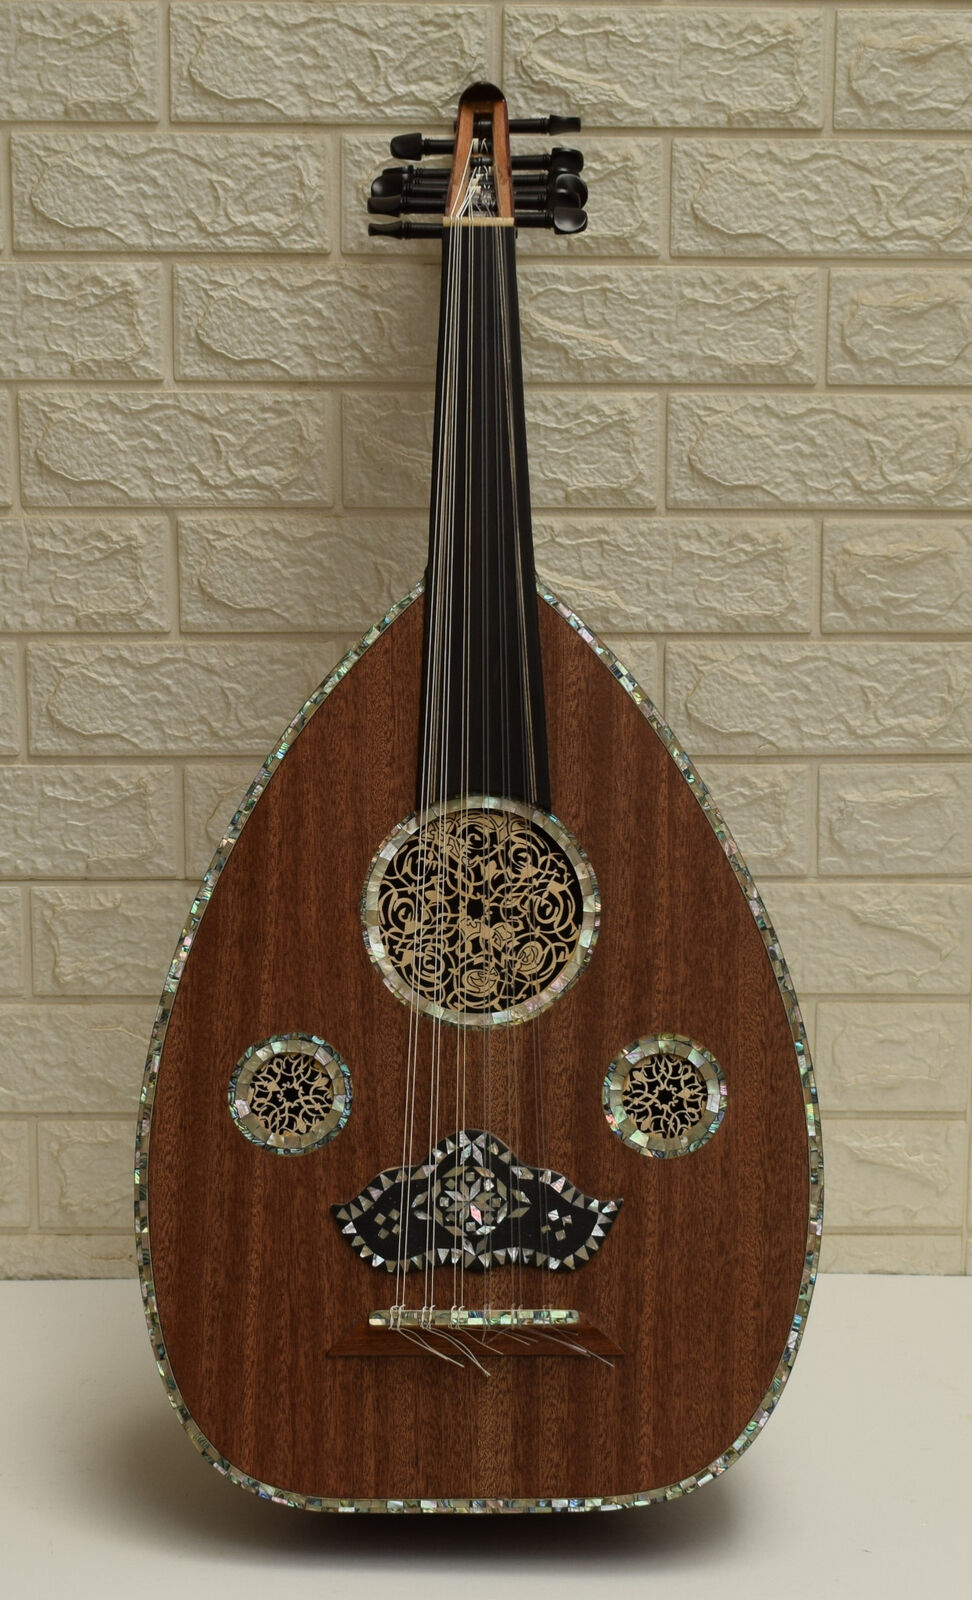 Egyptian Arabic Wood Oud, Middle Eastern Oriental Wooden Musical Instrument #26